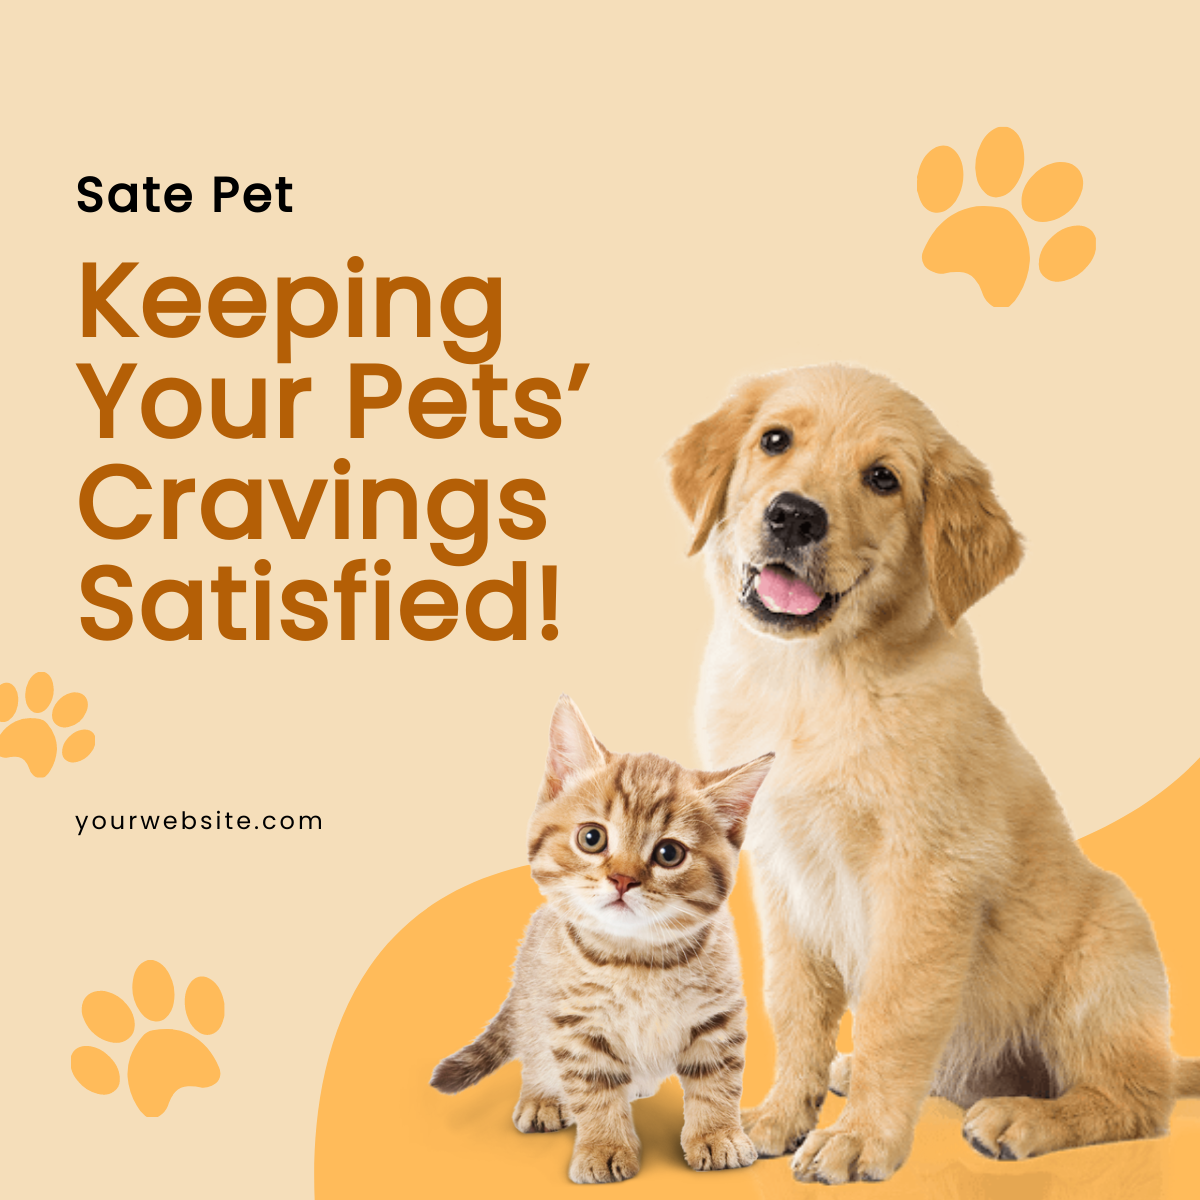 Free Pet Supplies Facebook Feed Ad Template